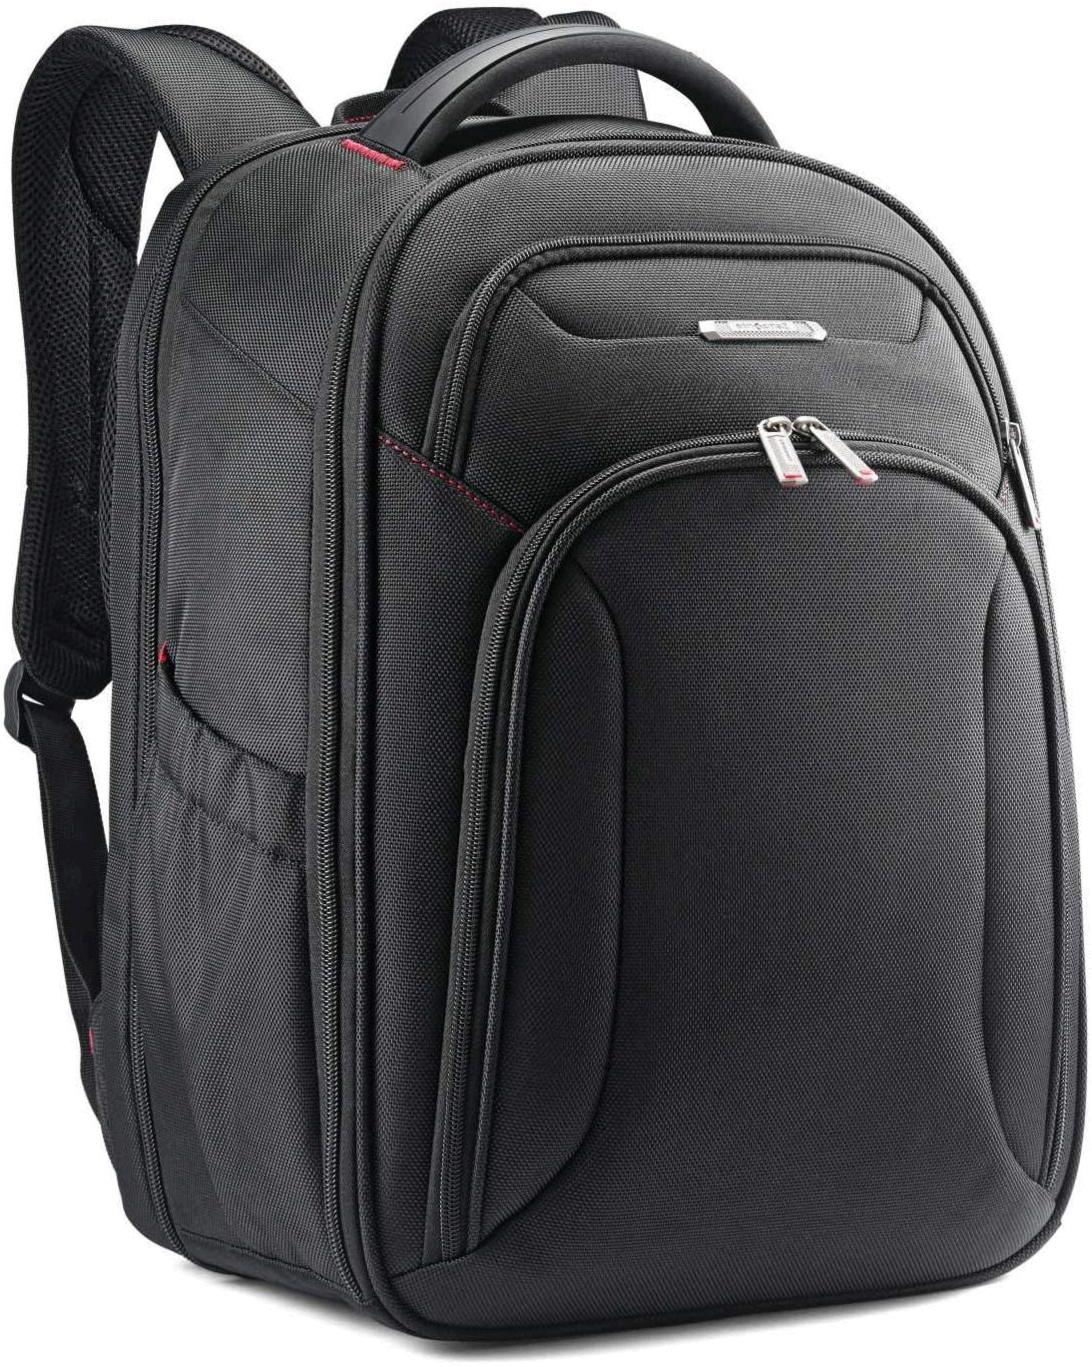 Samsonite Xenon 3.0 Large Backpack-Checkpoint Friendly, Black, Size One ...